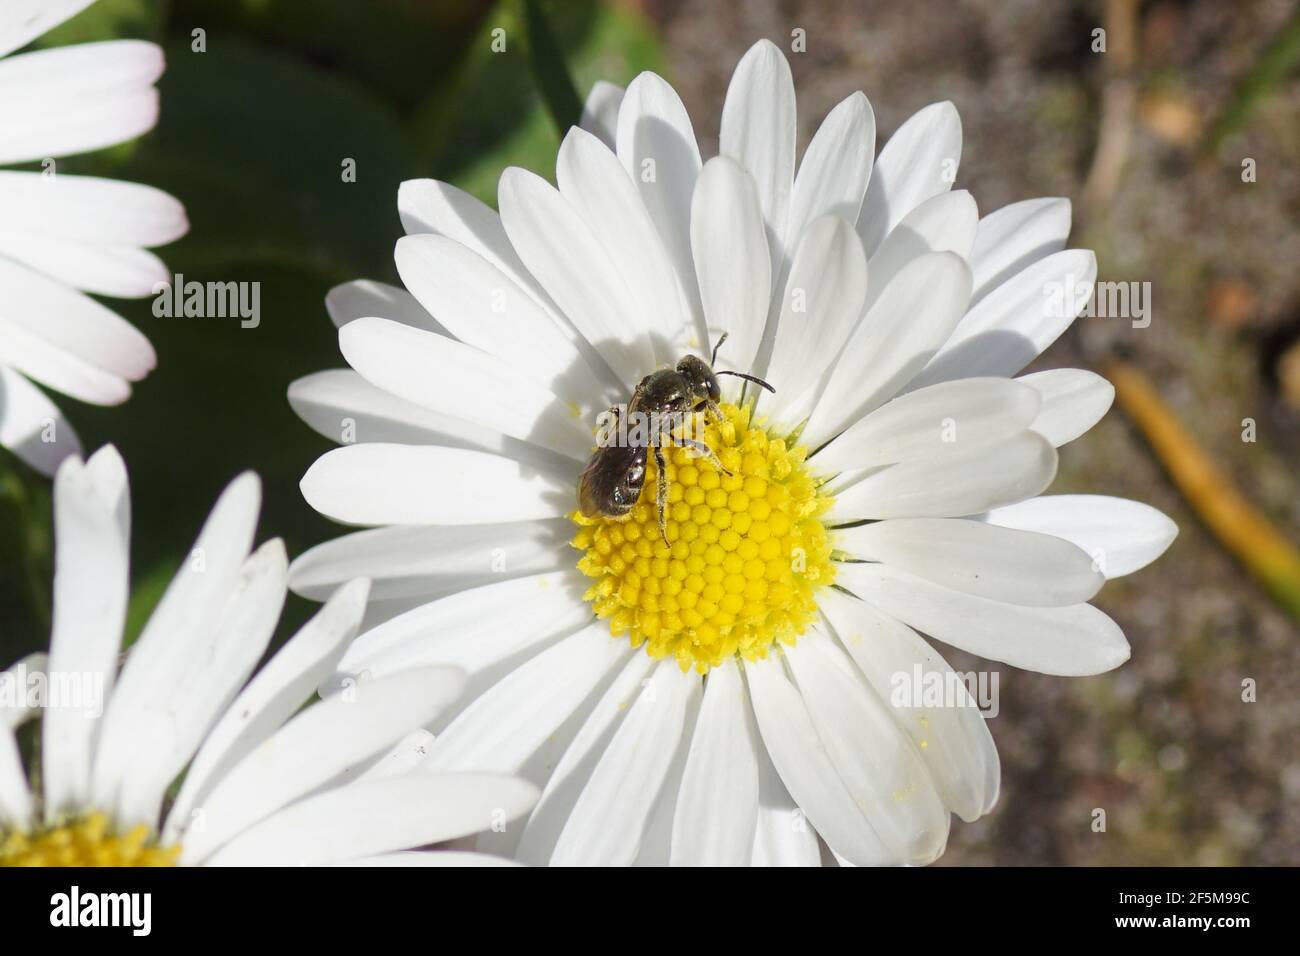 Small bee of the genus Lasioglossum, subgenus Dialictus, family Halictidae on a flower of common daisy Bellis perennis, family Asteraceae. Spring, Stock Photo